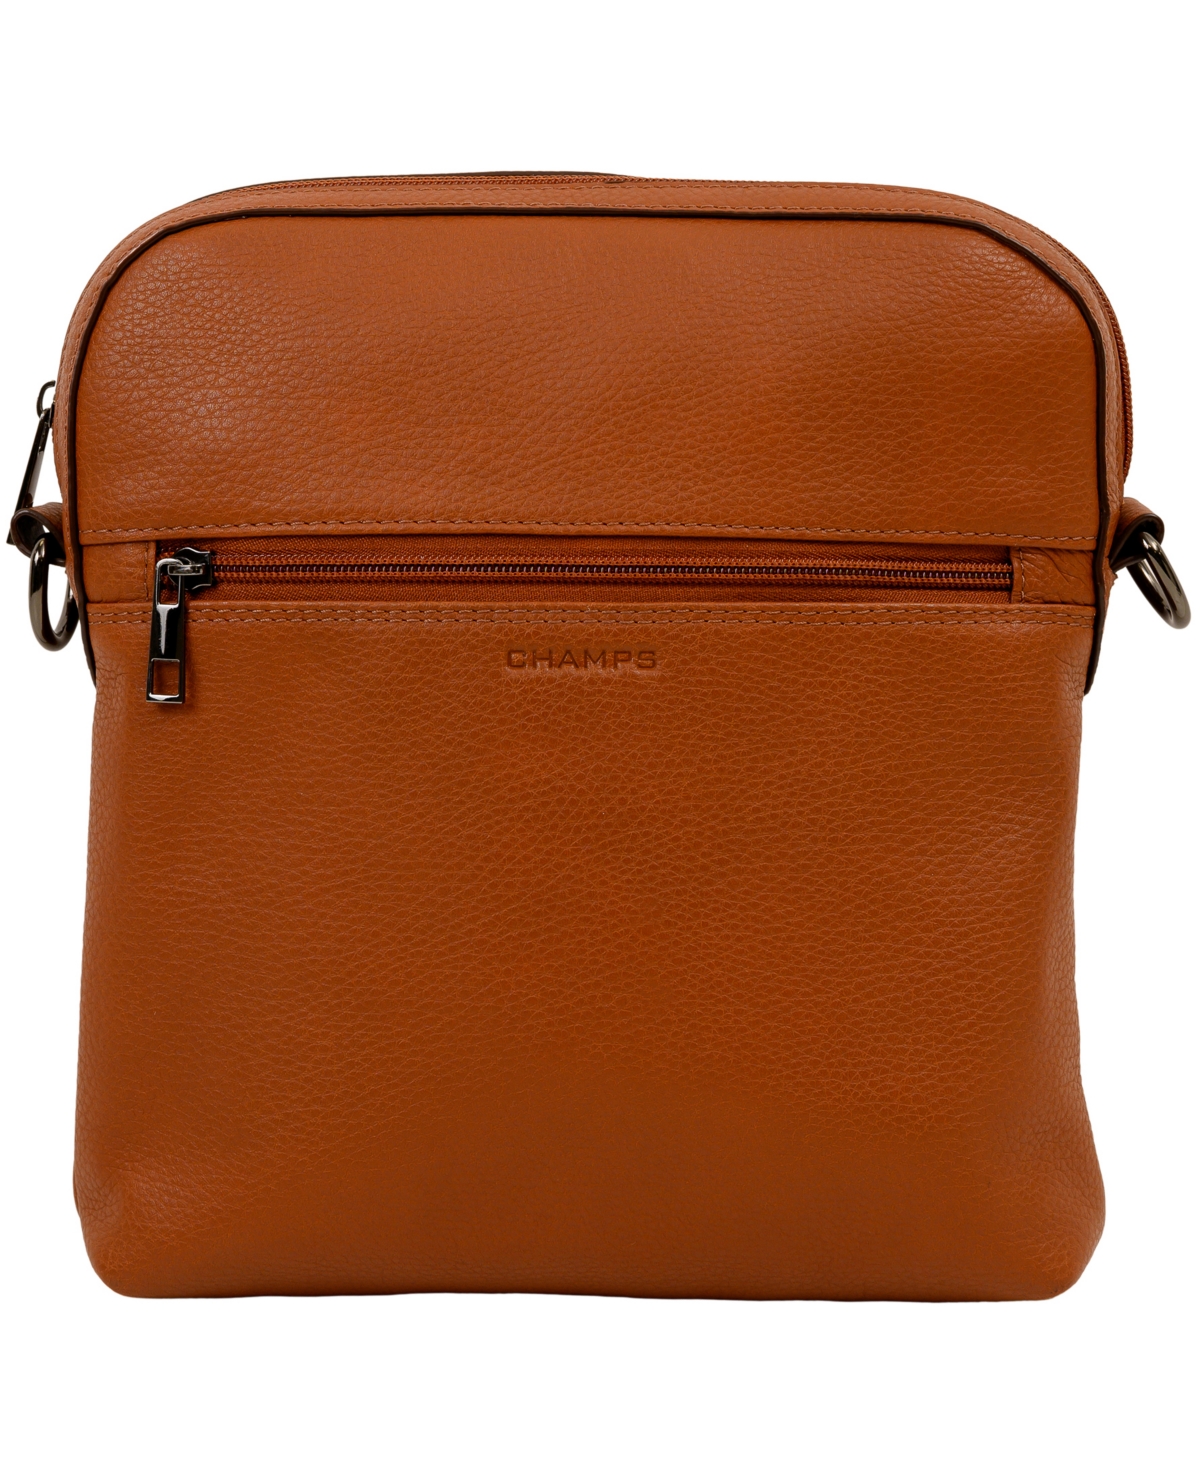 Champs Onyx Leather Camera Bag In Brown